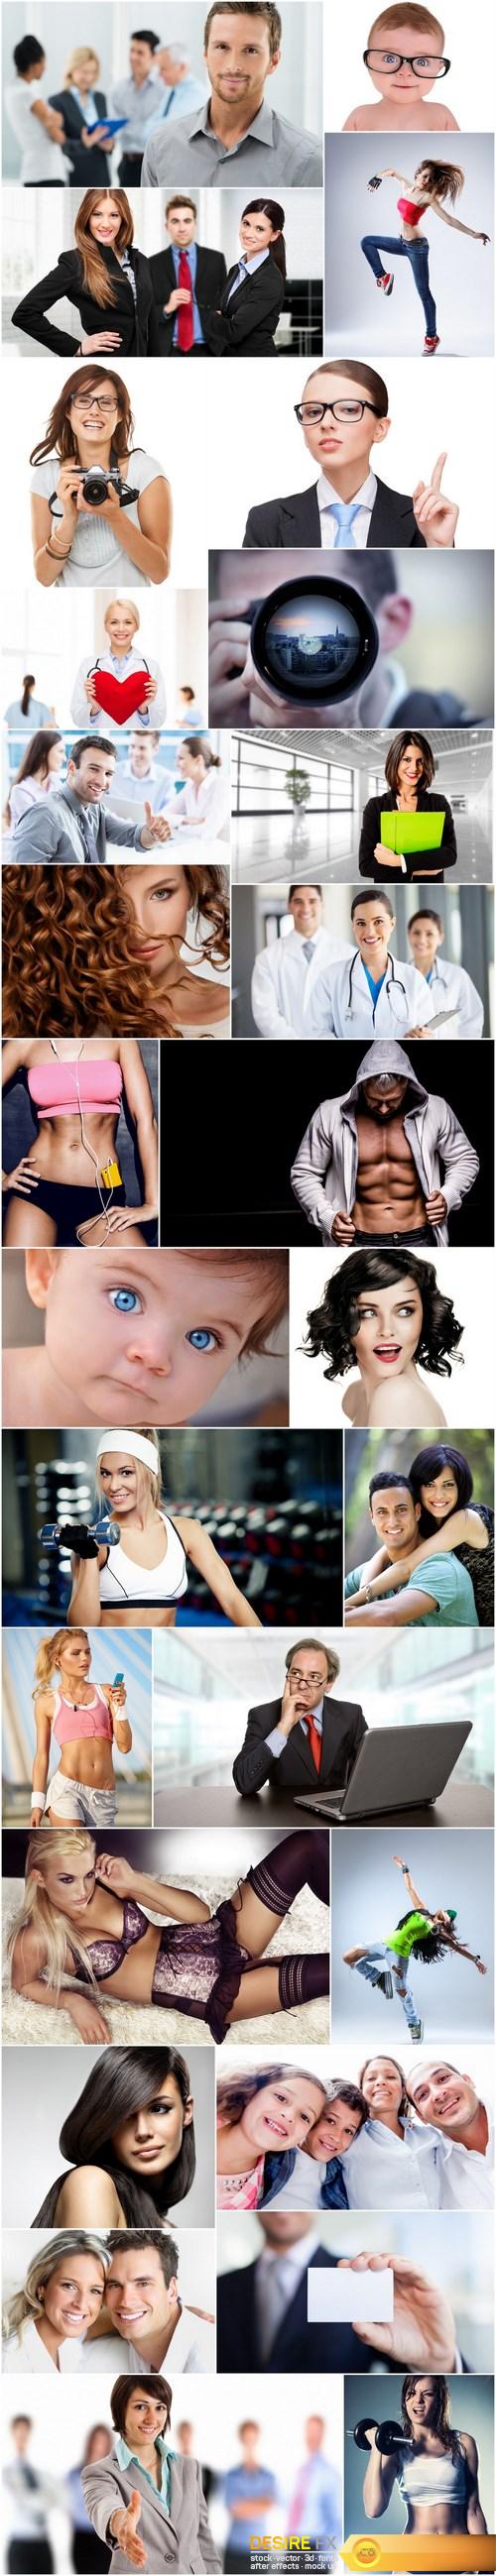 1500 + Lifestyles DisereFX Pack –  HQ Photo  & Images